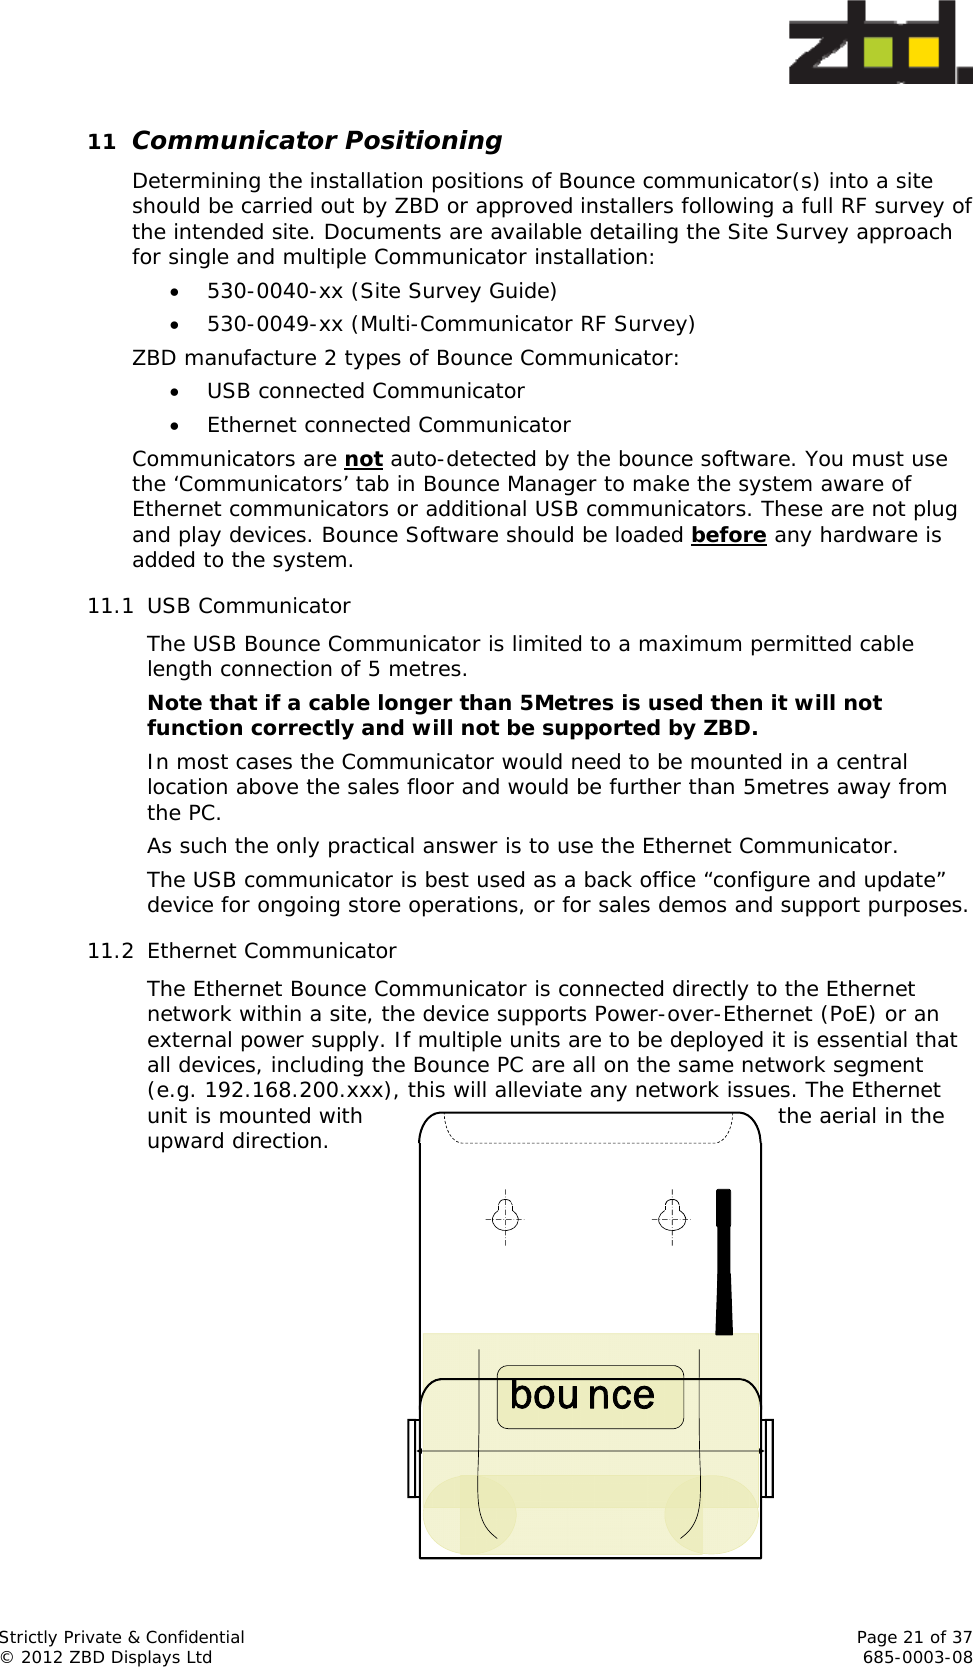  Strictly Private &amp; Confidential    Page 21 of 37 © 2012 ZBD Displays Ltd     685-0003-08 bou nce11 Communicator Positioning Determining the installation positions of Bounce communicator(s) into a site should be carried out by ZBD or approved installers following a full RF survey of the intended site. Documents are available detailing the Site Survey approach for single and multiple Communicator installation:  530-0040-xx (Site Survey Guide)  530-0049-xx (Multi-Communicator RF Survey) ZBD manufacture 2 types of Bounce Communicator:  USB connected Communicator  Ethernet connected Communicator Communicators are not auto-detected by the bounce software. You must use the ‘Communicators’ tab in Bounce Manager to make the system aware of Ethernet communicators or additional USB communicators. These are not plug and play devices. Bounce Software should be loaded before any hardware is added to the system.   11.1 USB Communicator The USB Bounce Communicator is limited to a maximum permitted cable length connection of 5 metres. Note that if a cable longer than 5Metres is used then it will not function correctly and will not be supported by ZBD. In most cases the Communicator would need to be mounted in a central location above the sales floor and would be further than 5metres away from the PC. As such the only practical answer is to use the Ethernet Communicator. The USB communicator is best used as a back office “configure and update” device for ongoing store operations, or for sales demos and support purposes. 11.2 Ethernet Communicator The Ethernet Bounce Communicator is connected directly to the Ethernet network within a site, the device supports Power-over-Ethernet (PoE) or an external power supply. If multiple units are to be deployed it is essential that all devices, including the Bounce PC are all on the same network segment (e.g. 192.168.200.xxx), this will alleviate any network issues. The Ethernet unit is mounted with  the aerial in the upward direction.             